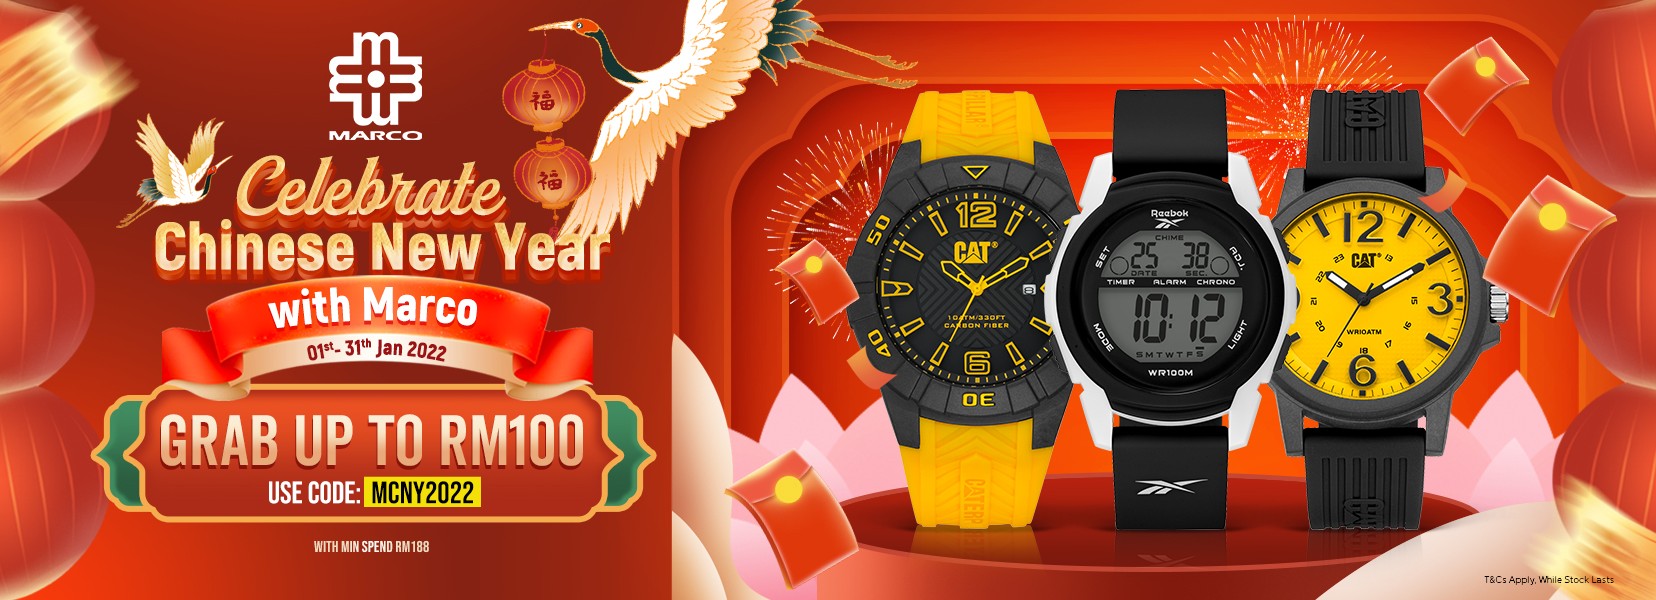 Celebrate Chinese New Year with Marco GRAB UP TO RM100